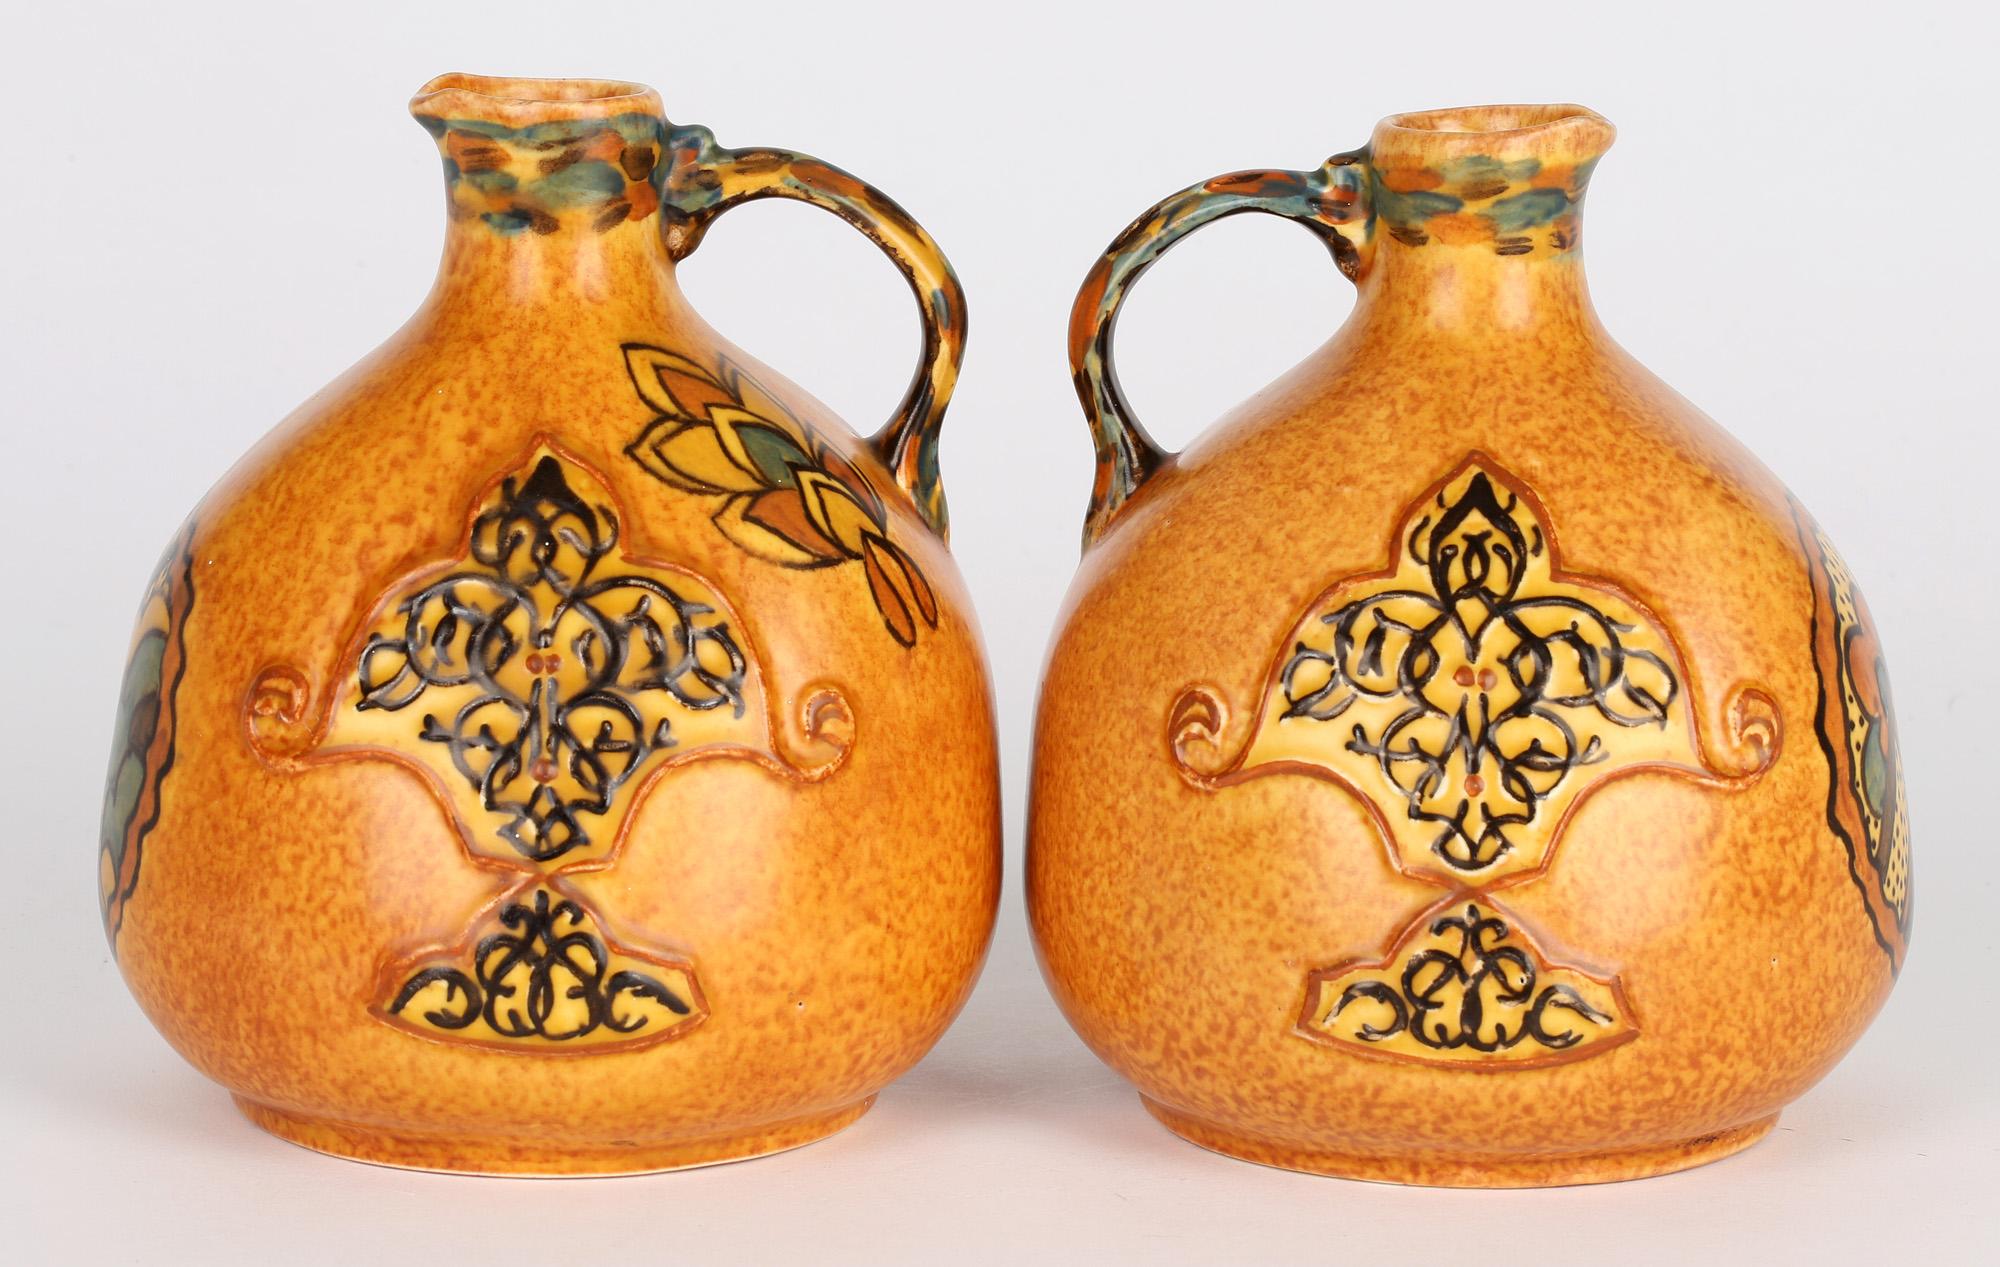 Hand-Painted George Clews Tunstall Pair Chameleon Ware Art Deco Persian Pottery Jugs For Sale